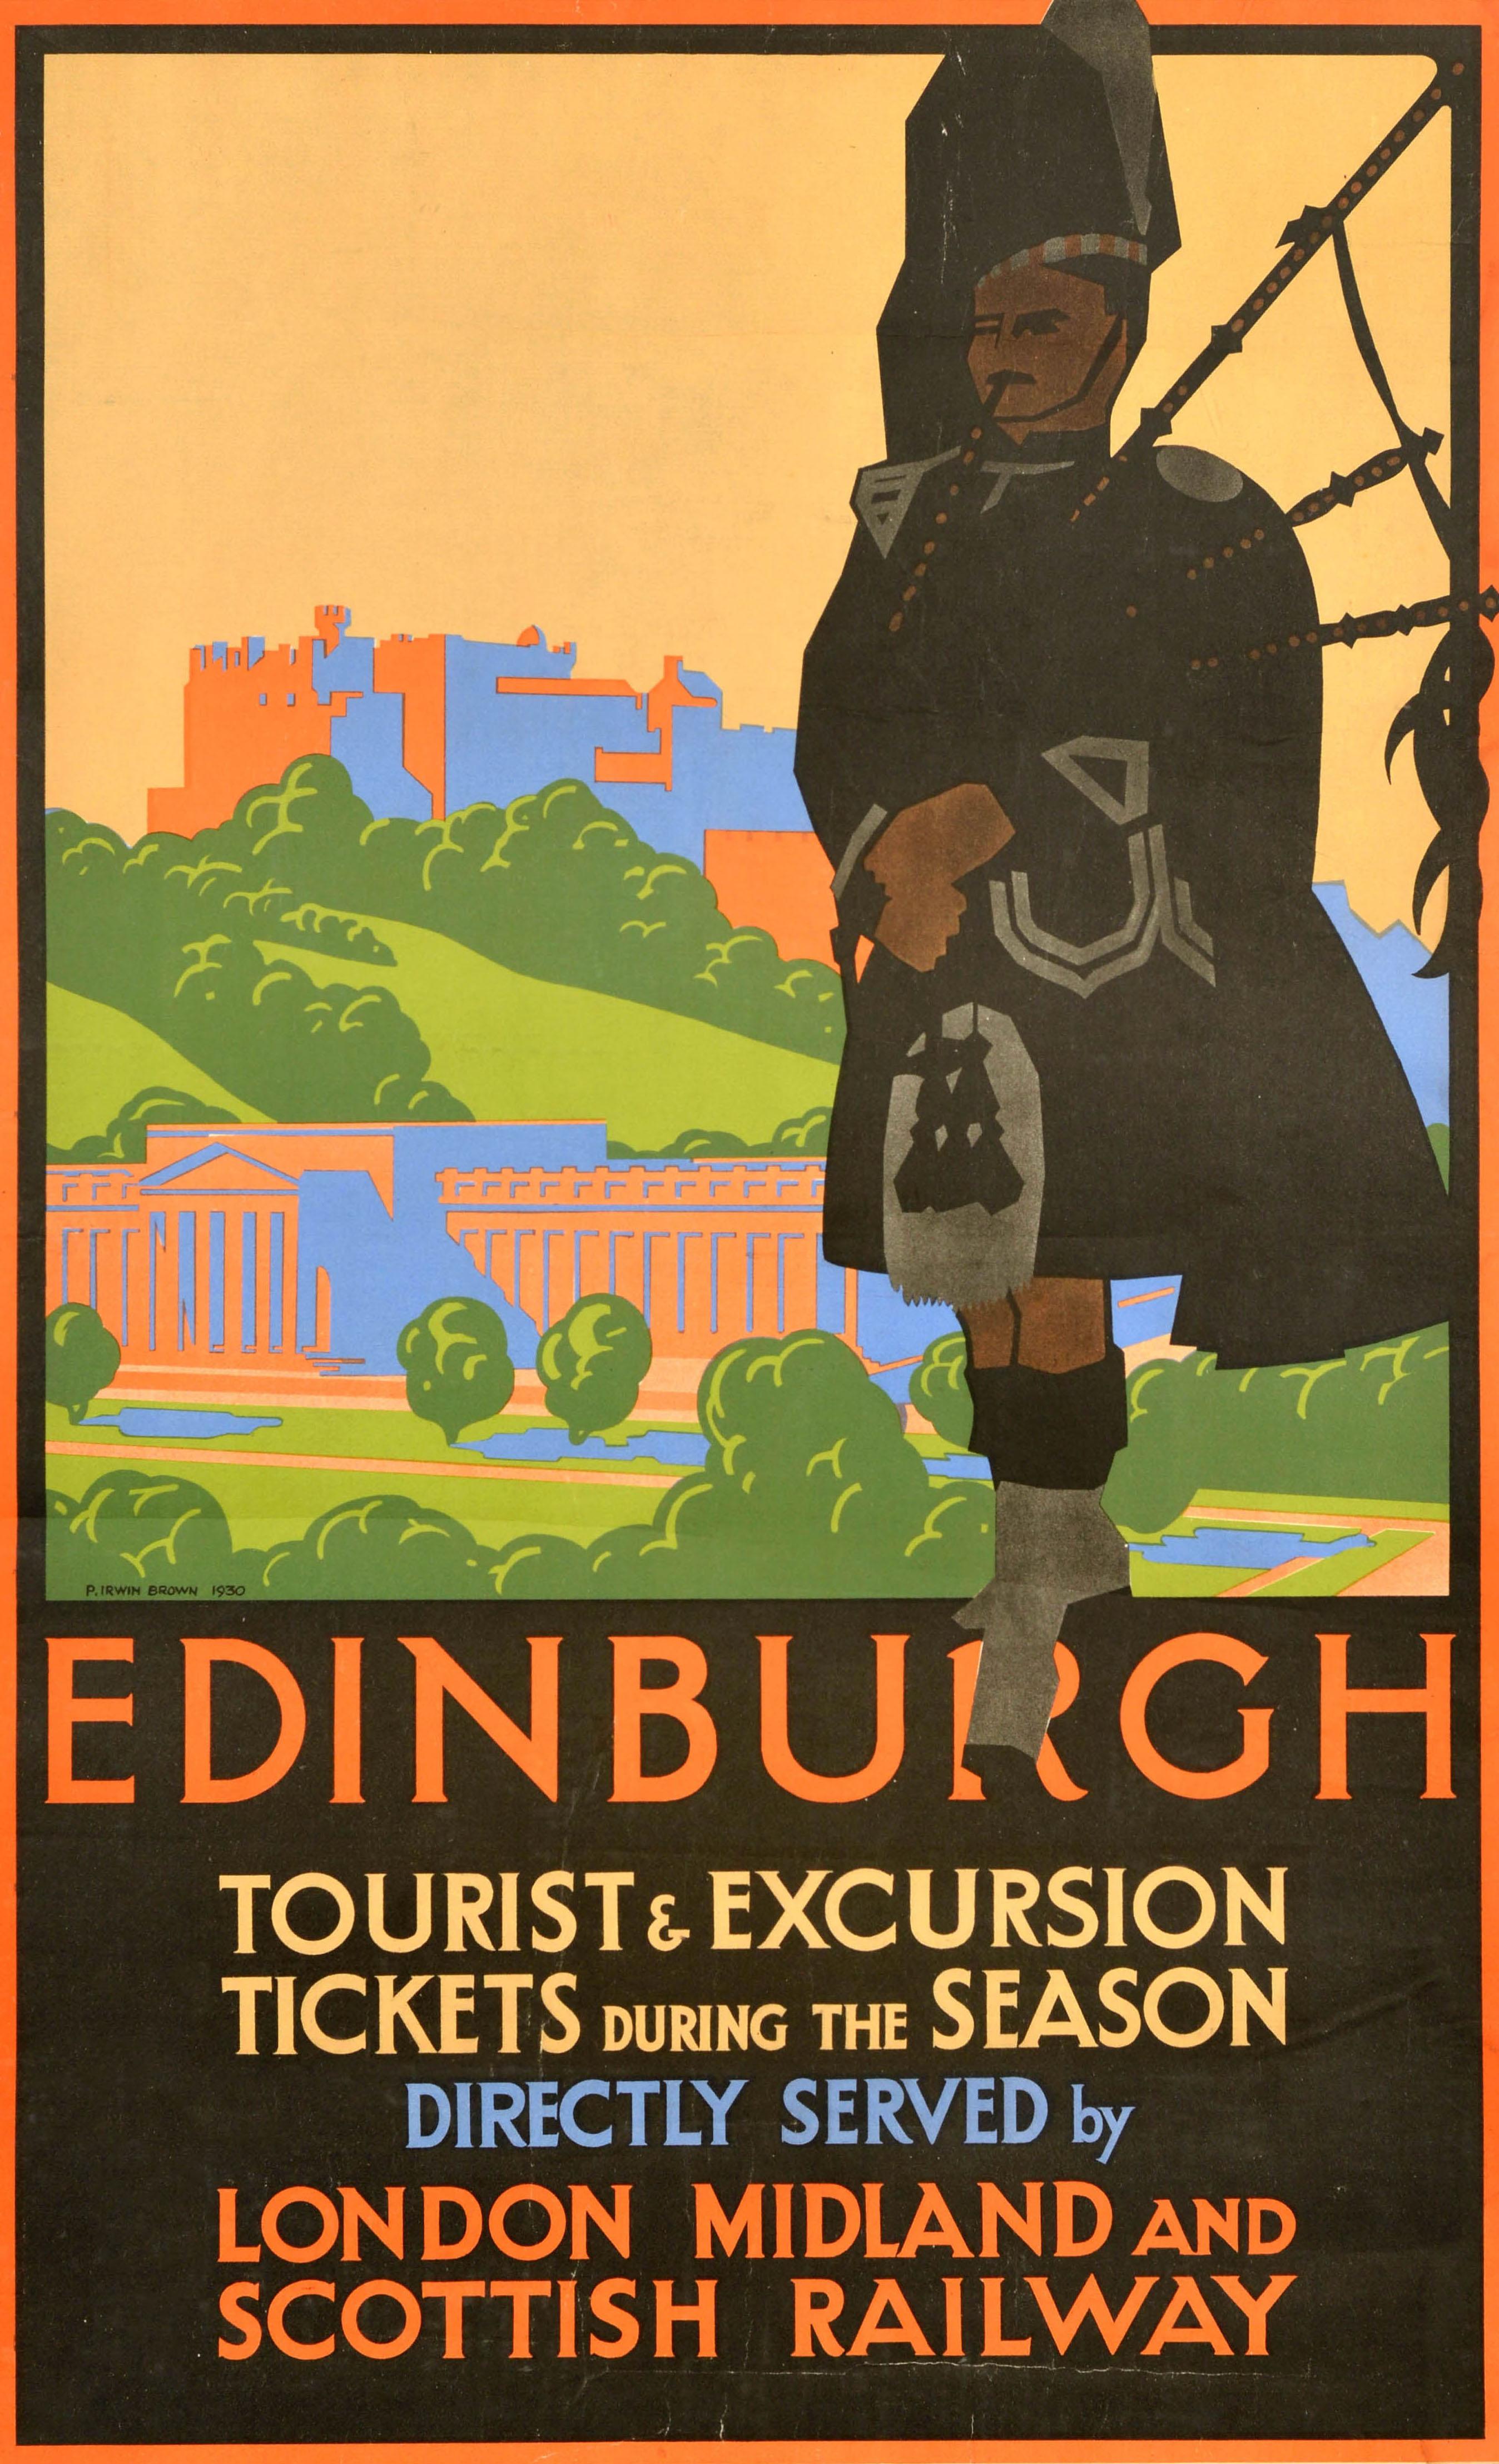 Original vintage LMS travel poster for Edinburgh featuring a great illustration of a piper of the Black Watch Royal Regiment of Scotland in military tartan uniform playing the bagpipes with a colourful view of trees and the city leading to Edinburgh